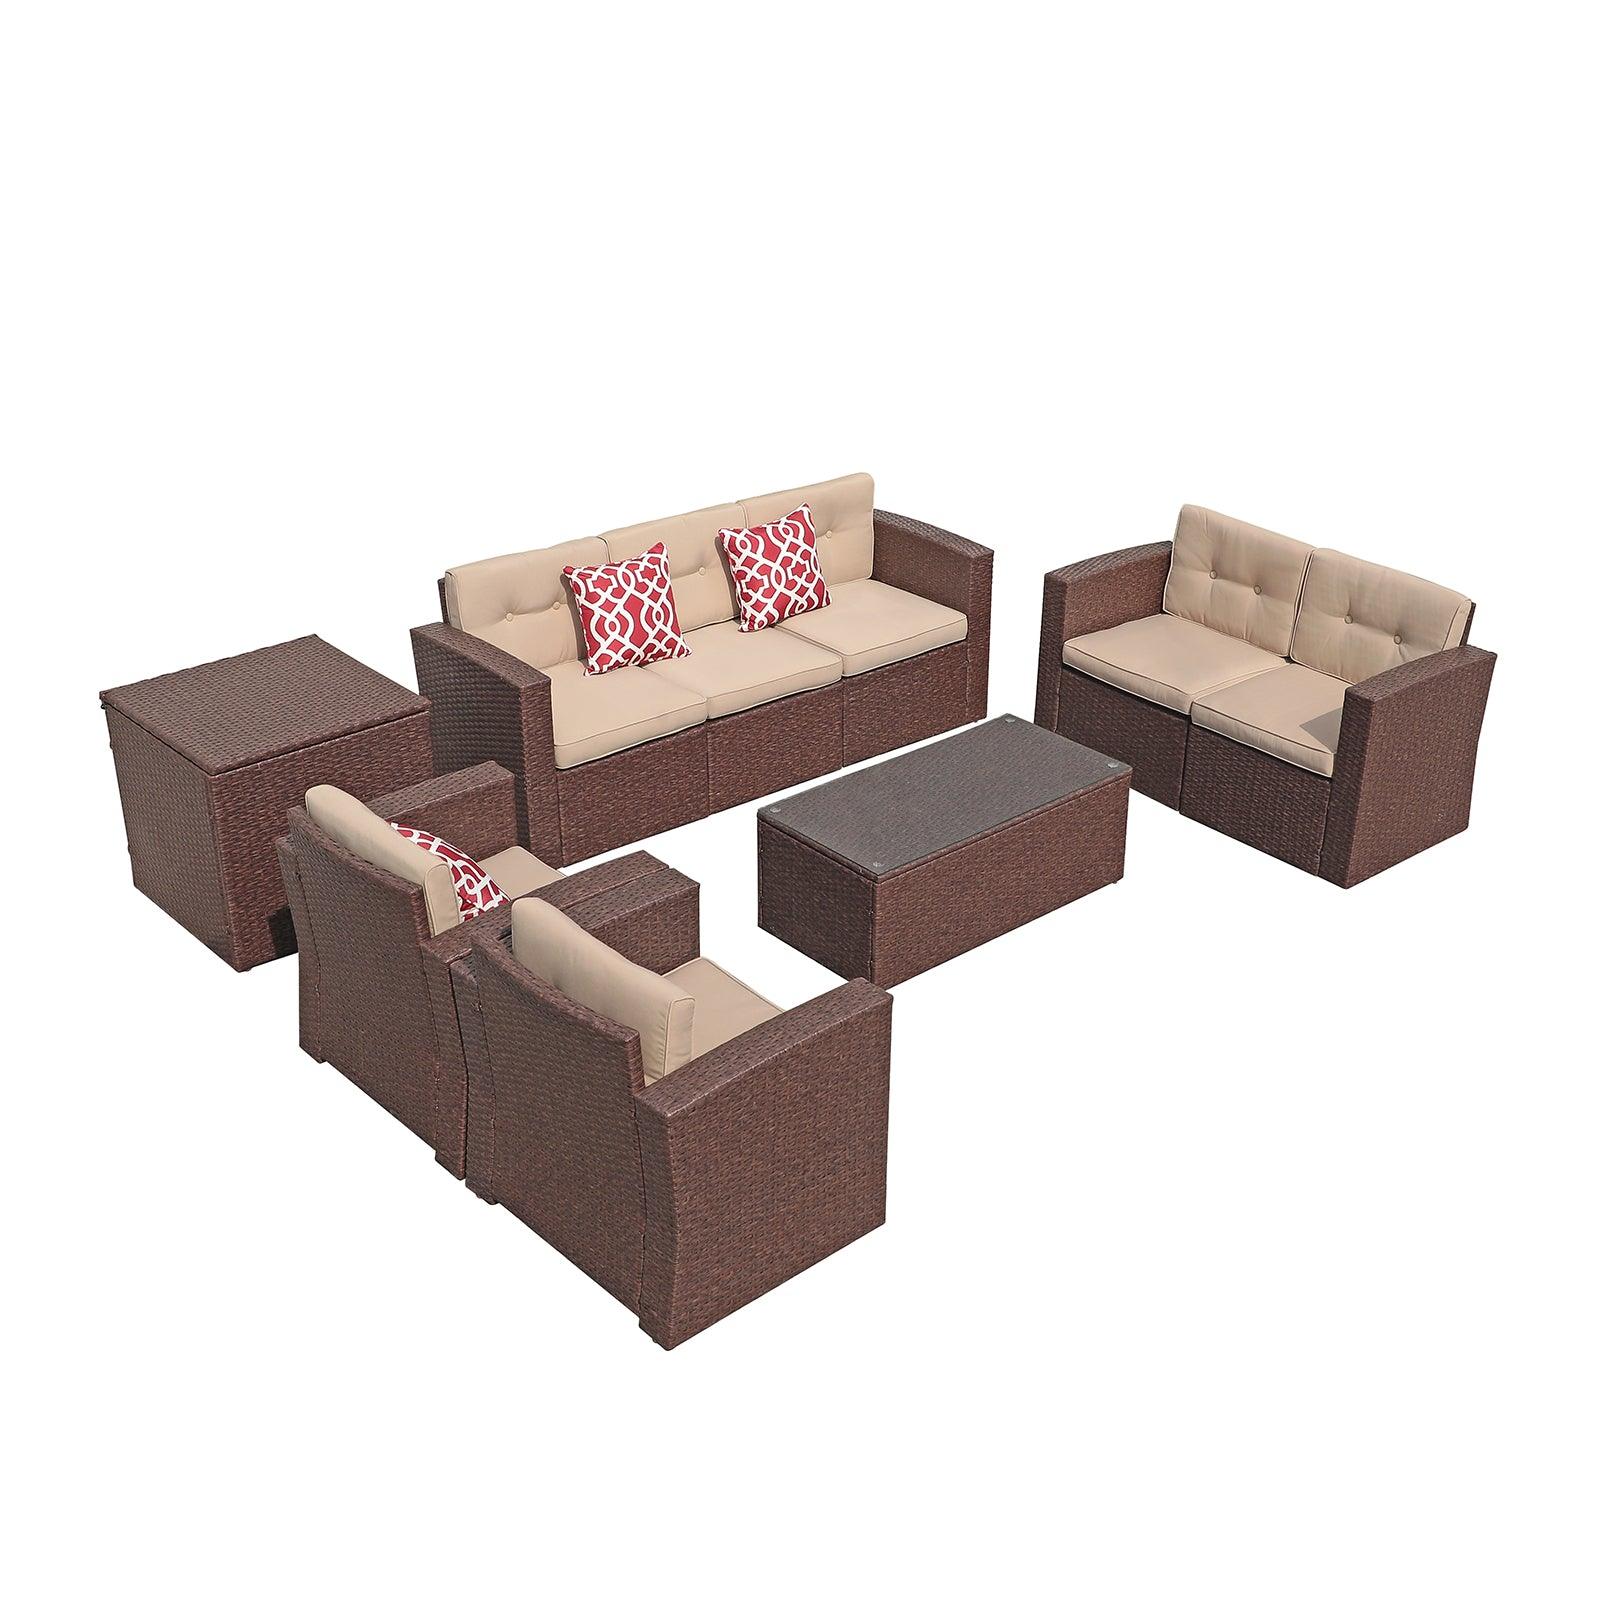 San Terraza 9-pc. Outdoor Sectional Set with Two Chairs sale best